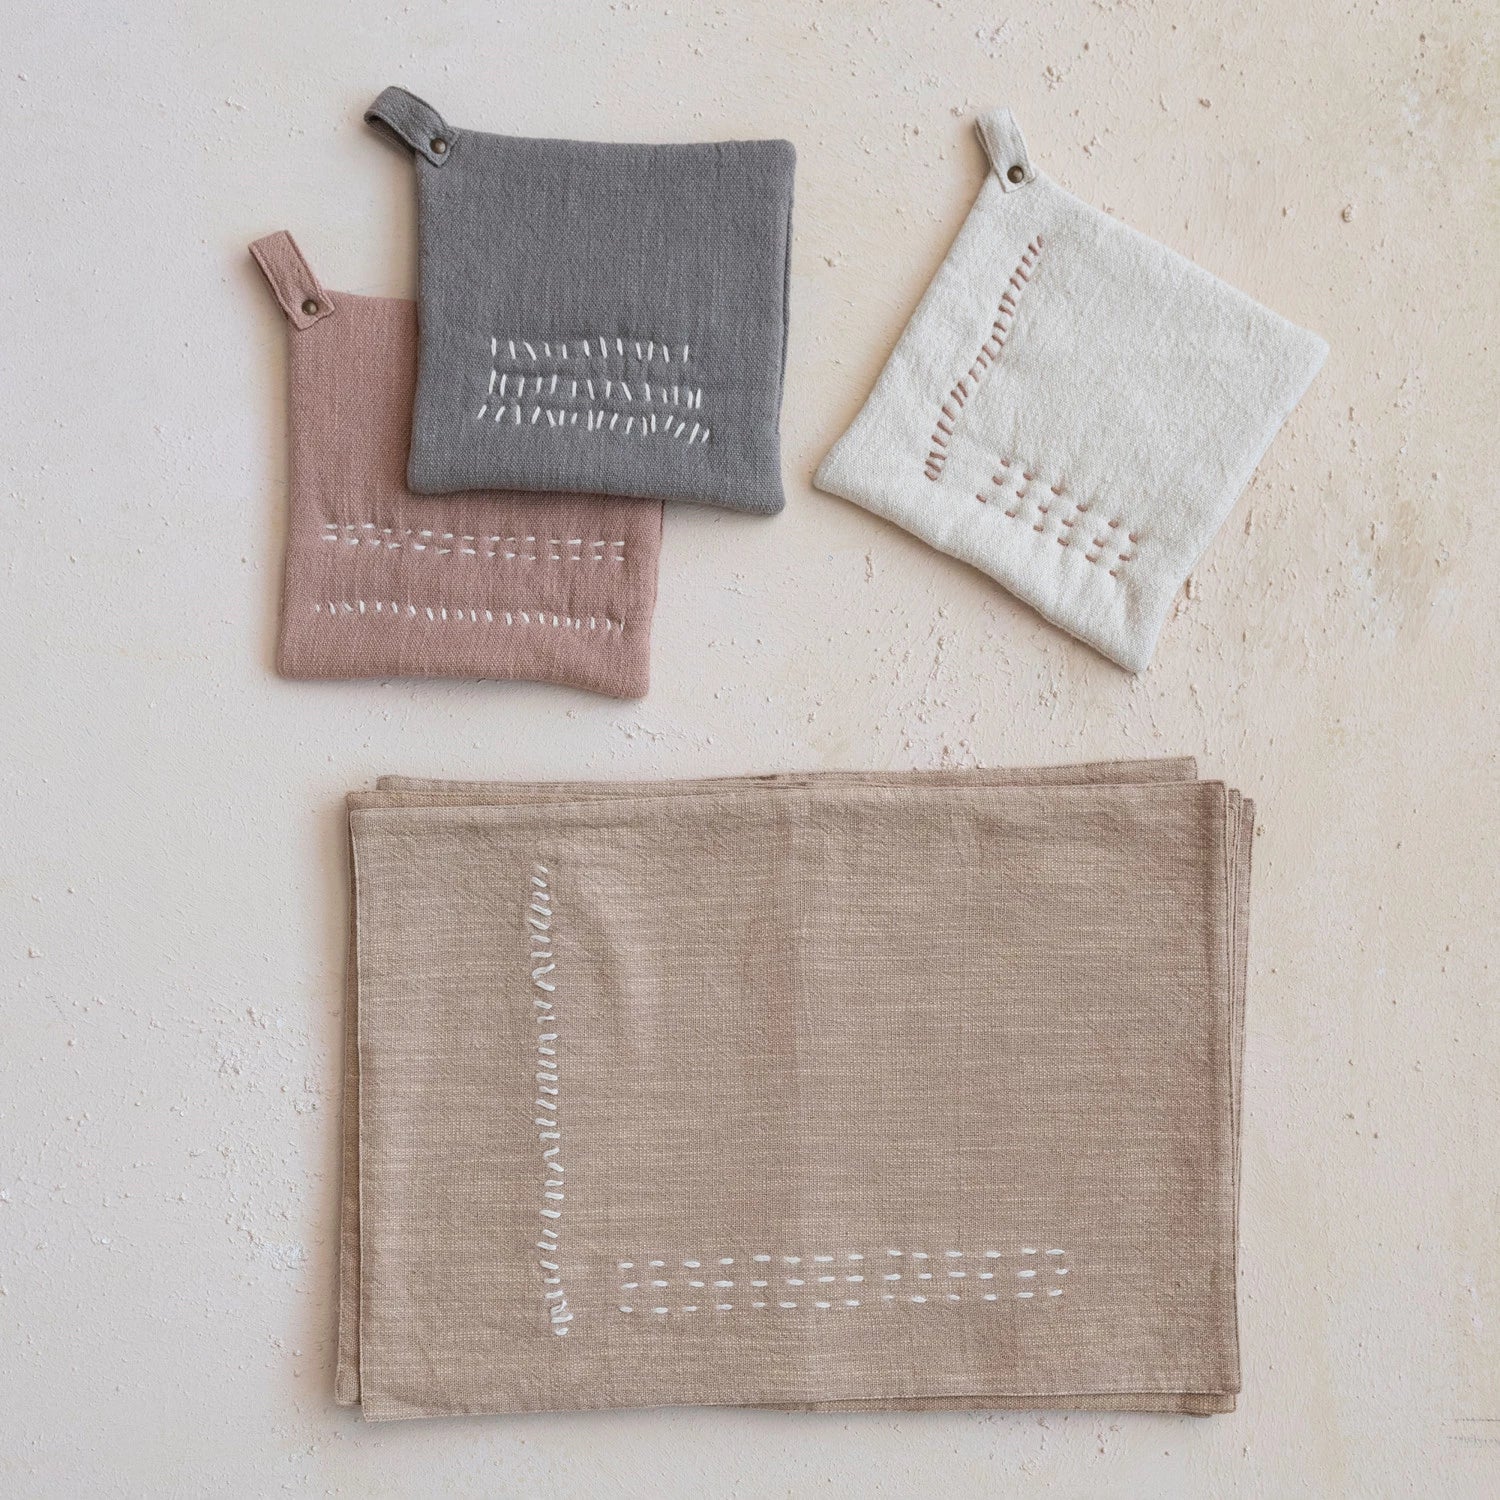 Embroidered cotton slub pot holders in grey, linen, and washed terracotta. Pictured next to embroidered beige kitchen towels